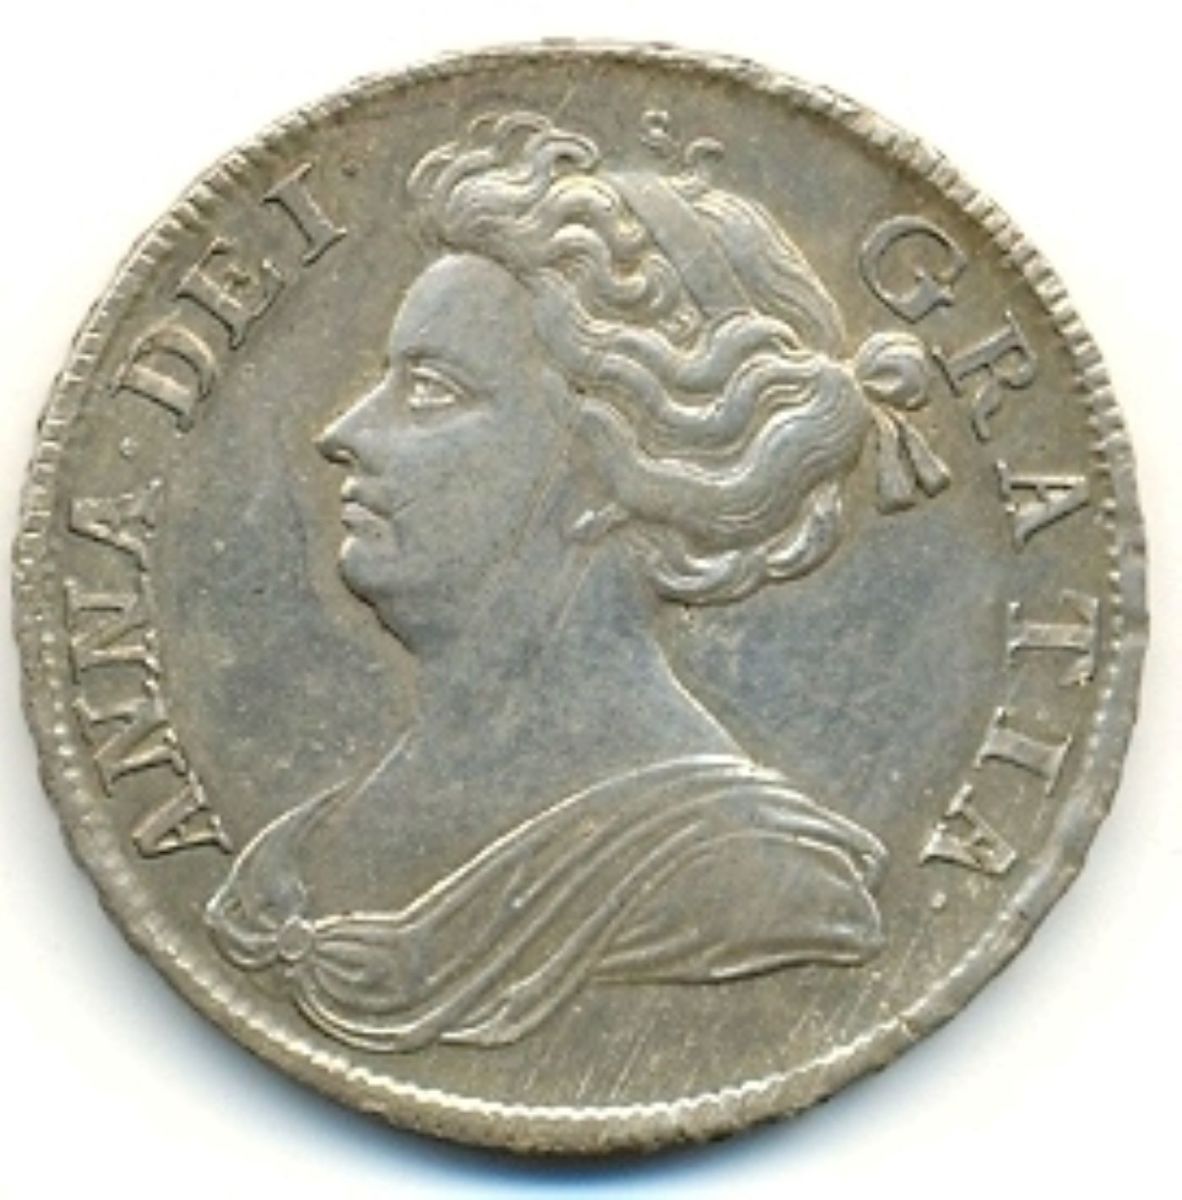 A half crown from Queen Anne's reign (1702–1714)